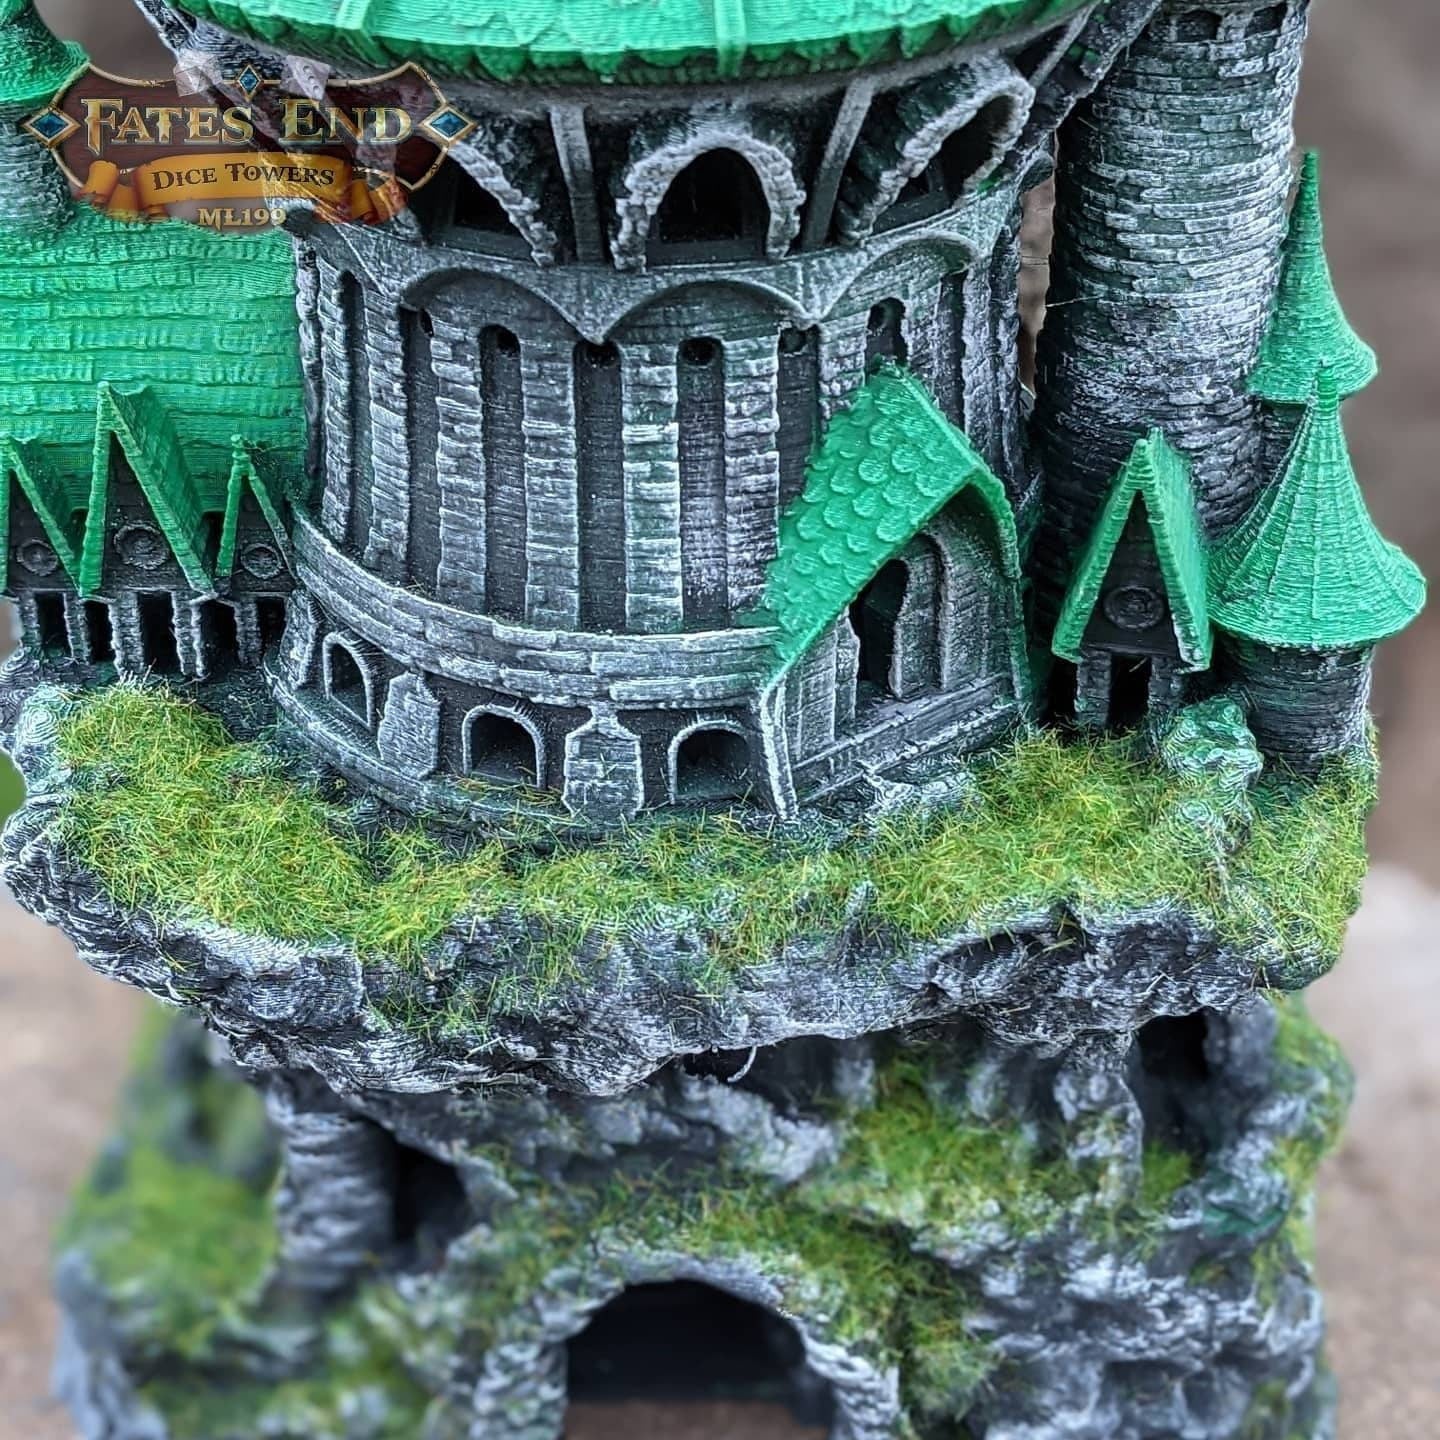 Sorcerer Class 3D Printed Dice Tower - Fate's End Collection - Tabletop RPG Gaming Fantasy Cosplay - Step into the realm of arcane energies.